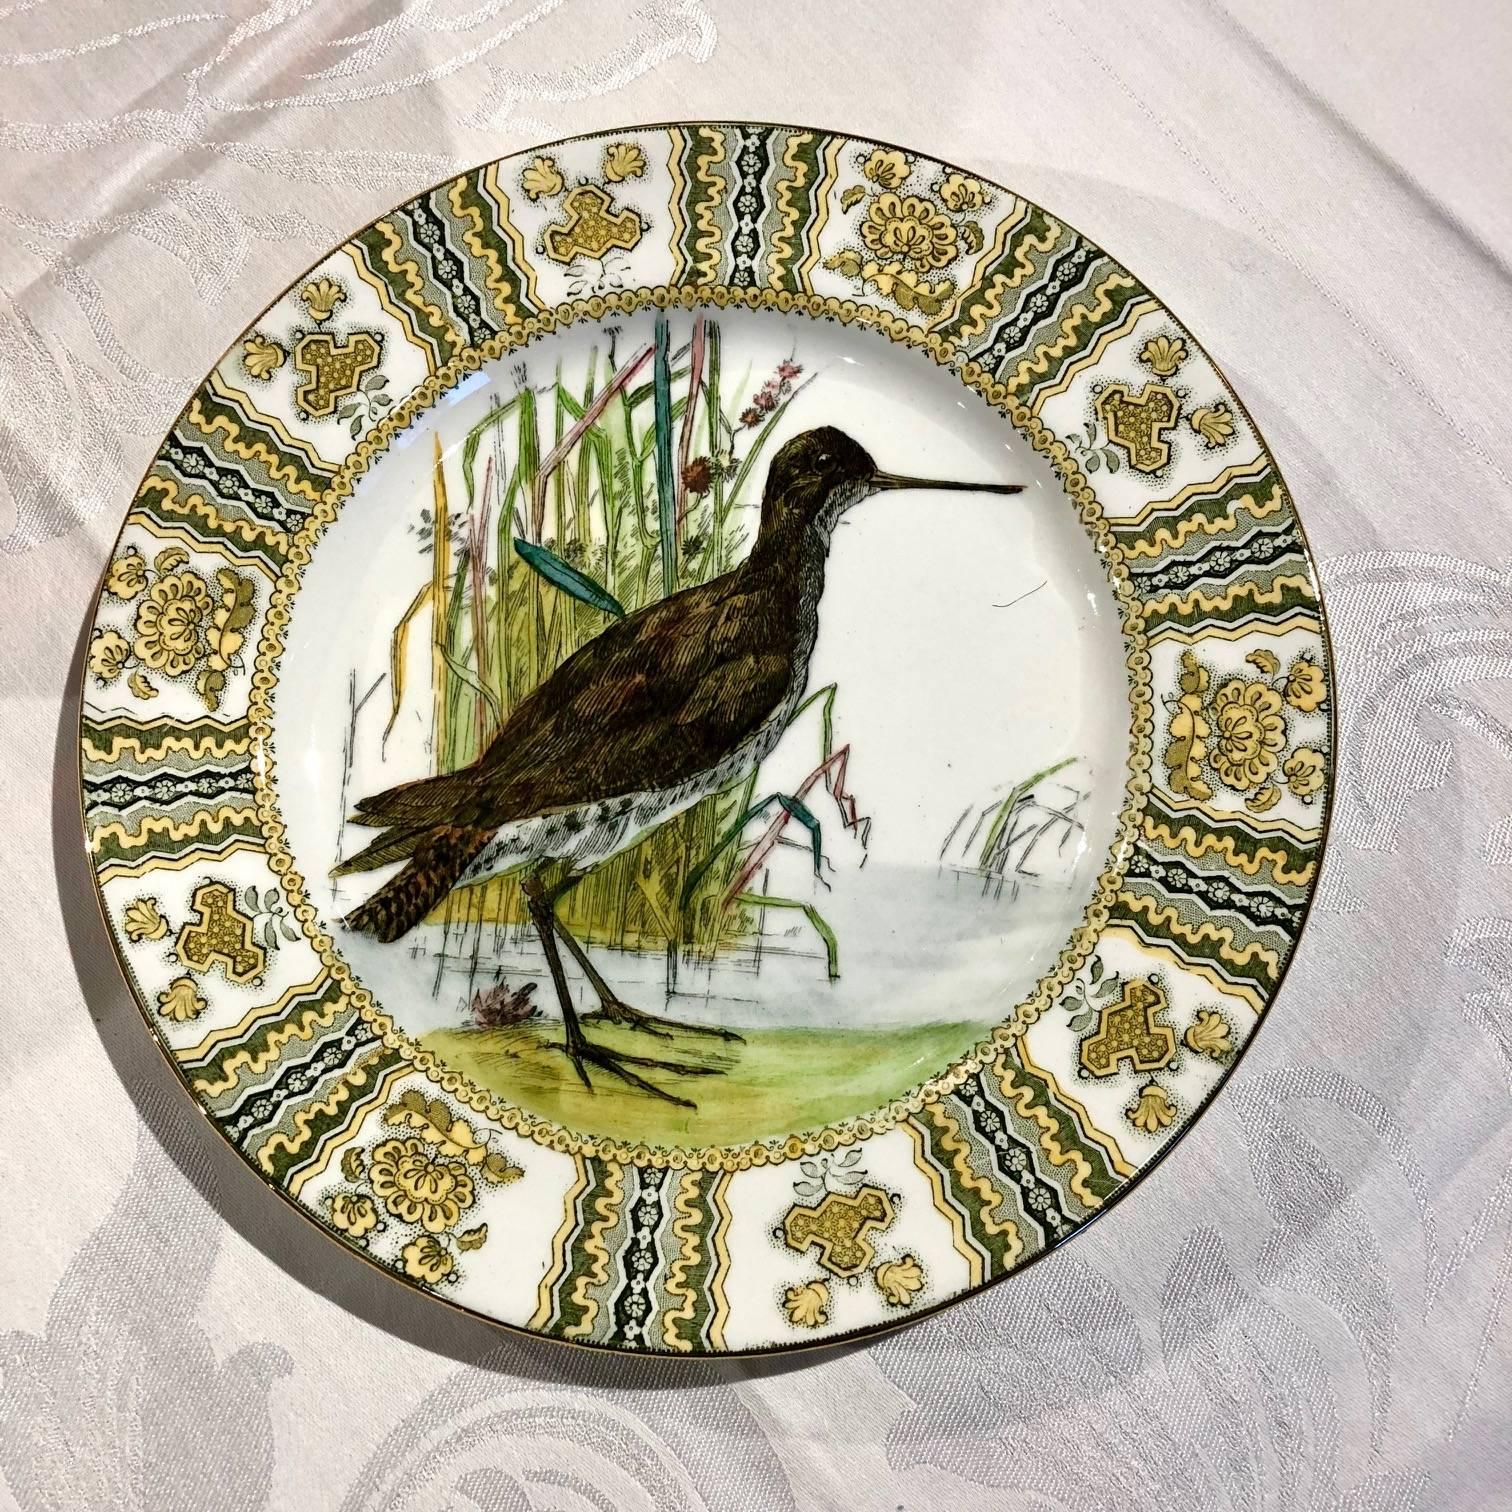 British Set of 12 Royal Doulton Dinner Plates with Hand Colored Birds